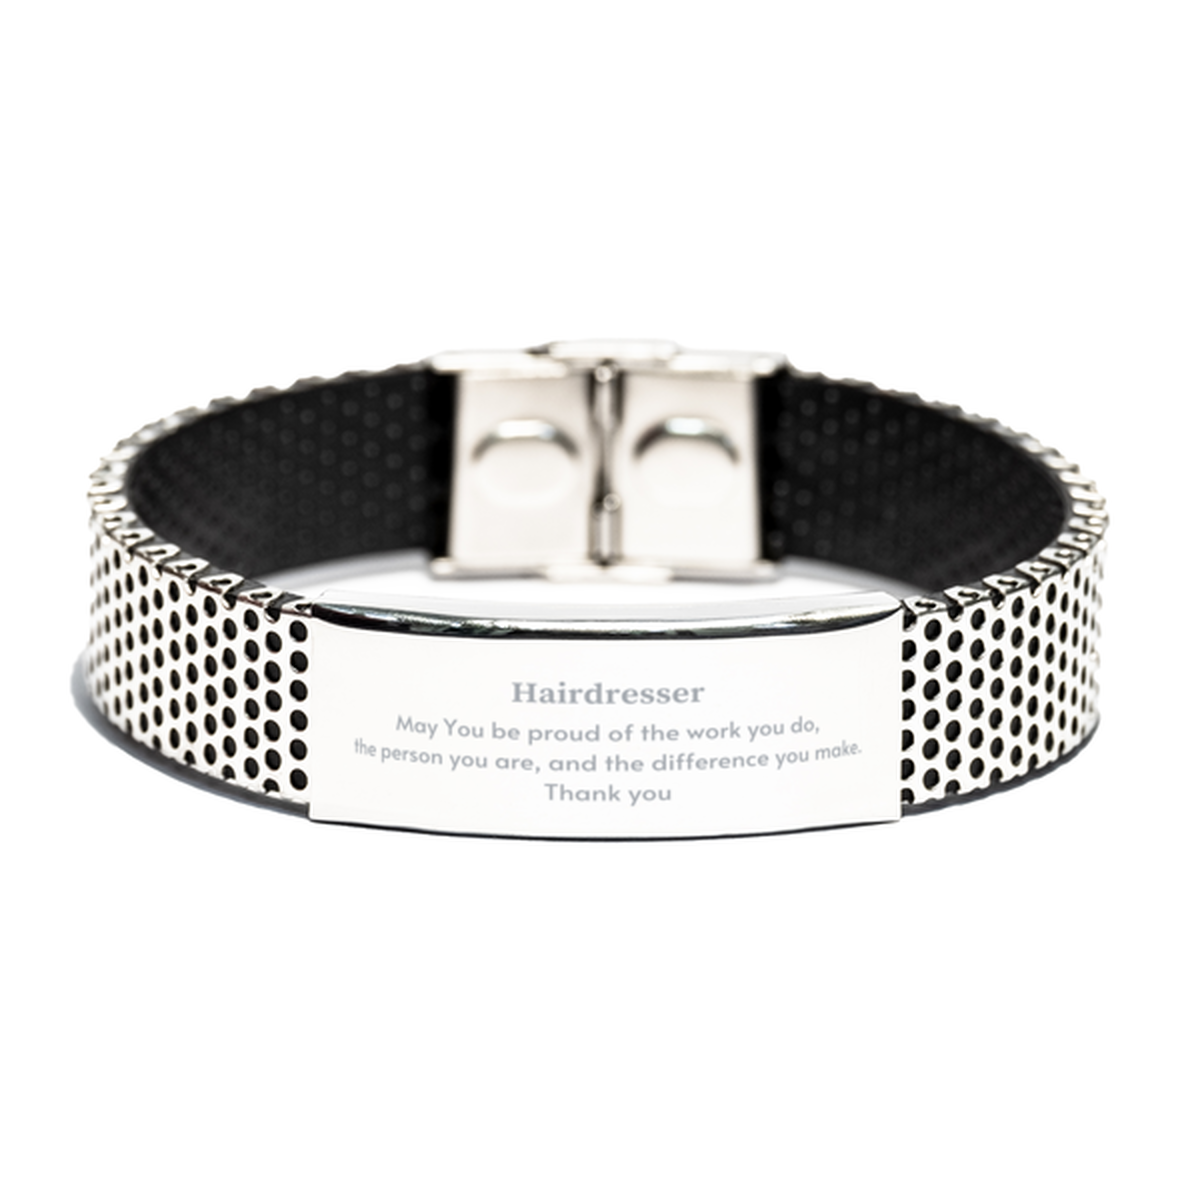 Heartwarming Stainless Steel Bracelet Retirement Coworkers Gifts for Hairdresser, Hairdresser May You be proud of the work you do, the person you are Gifts for Boss Men Women Friends